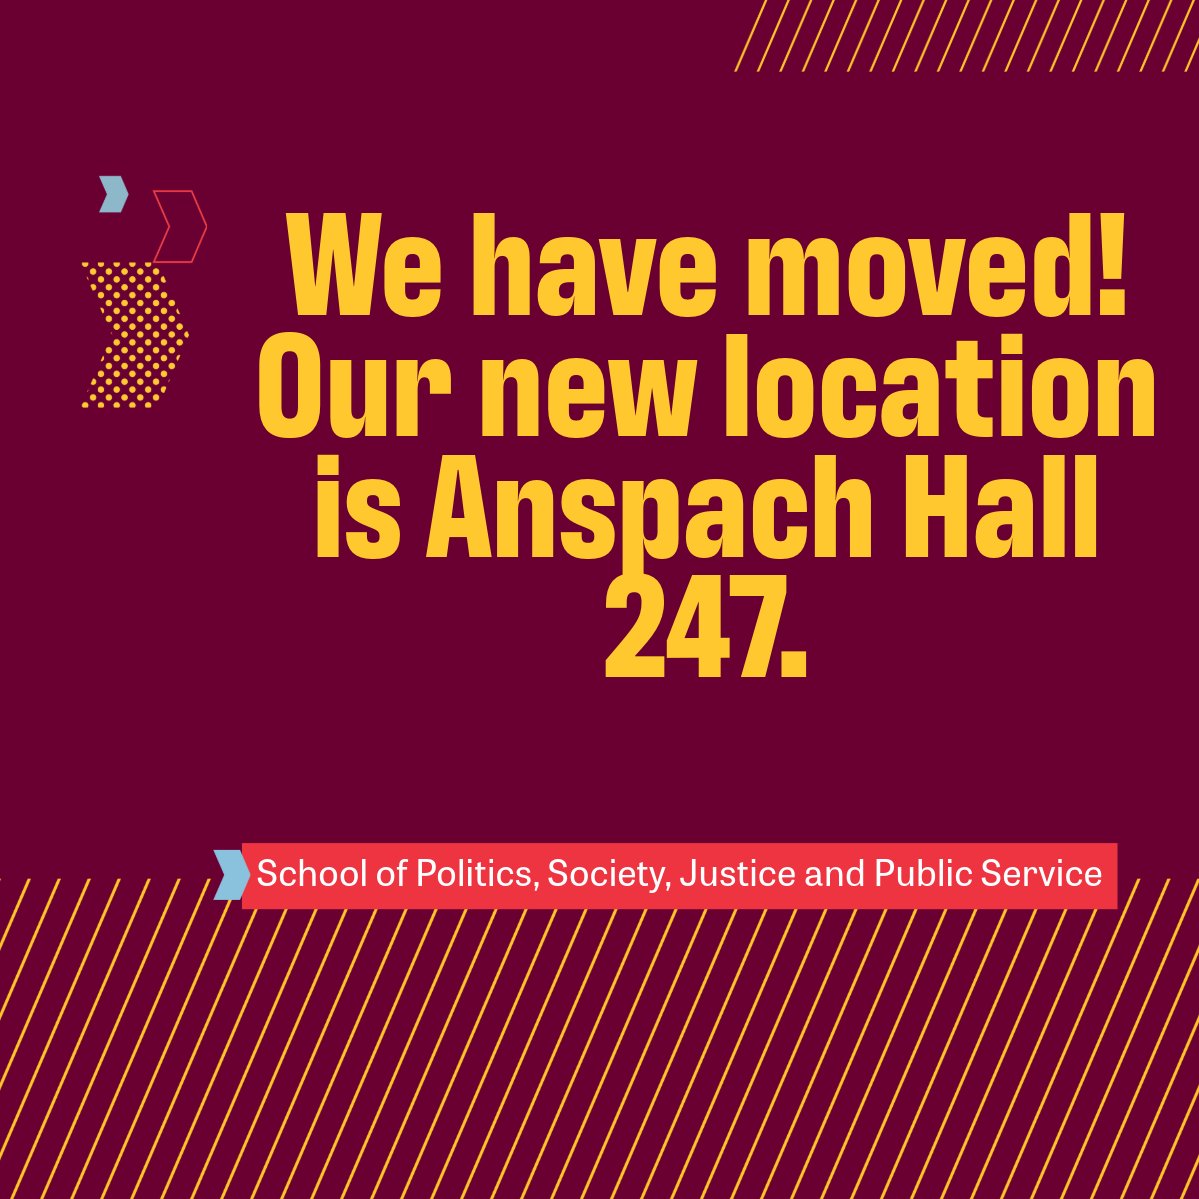 We have moved! Stop in and see us in Anspach Hall 247! 🔥⬆️